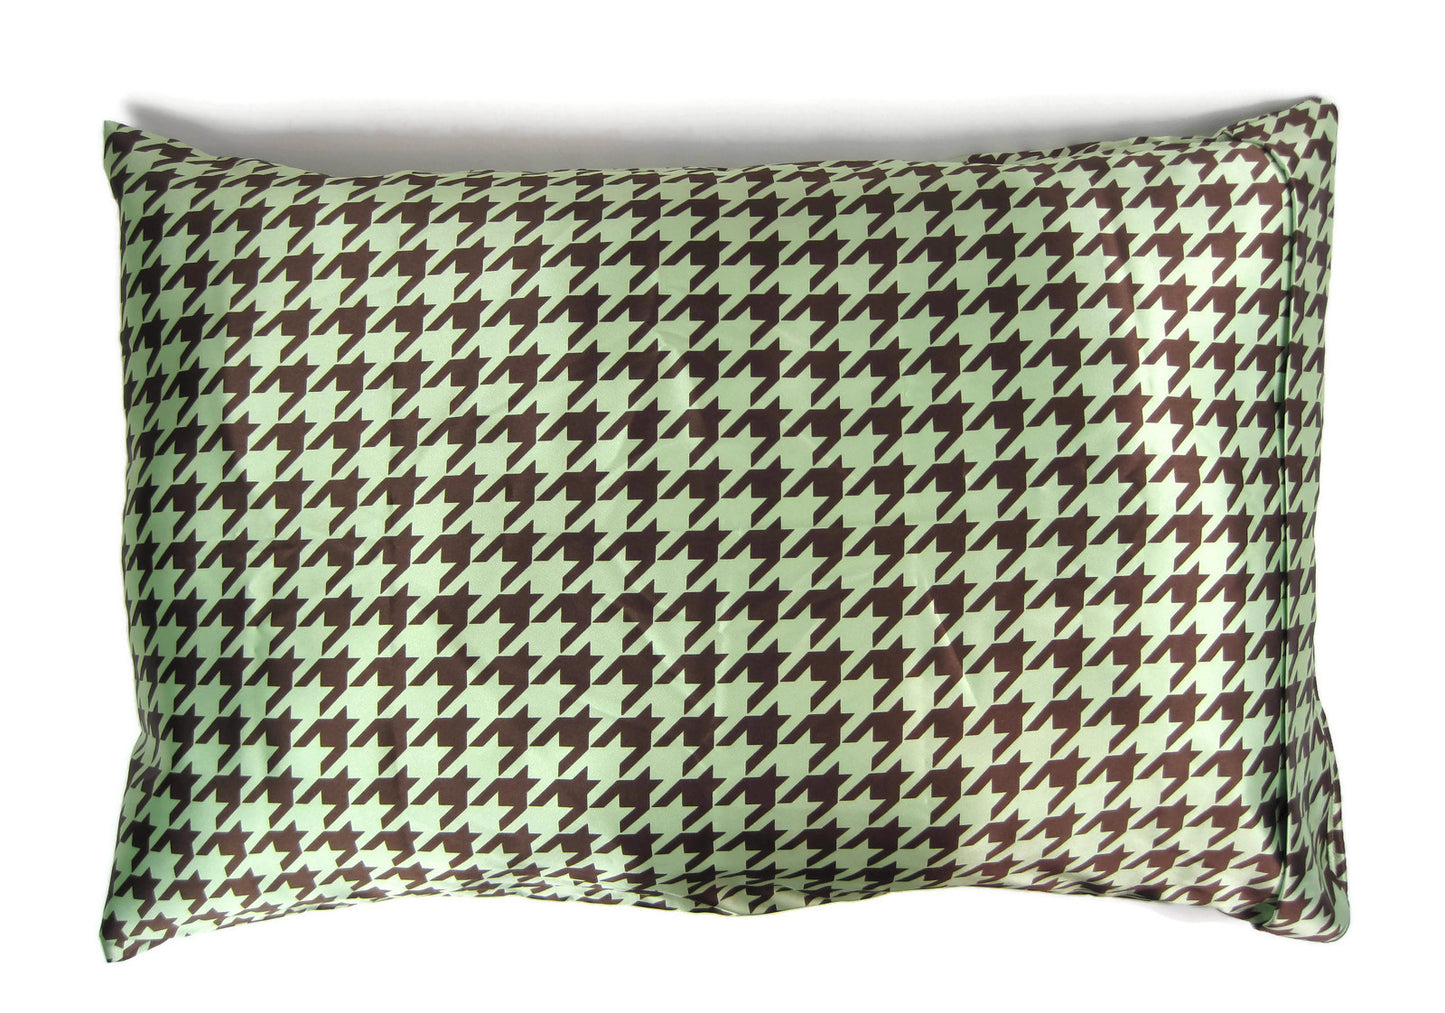 Luxe Satin Zippered Pillowcase - Houndstooth Chocolate/Mint